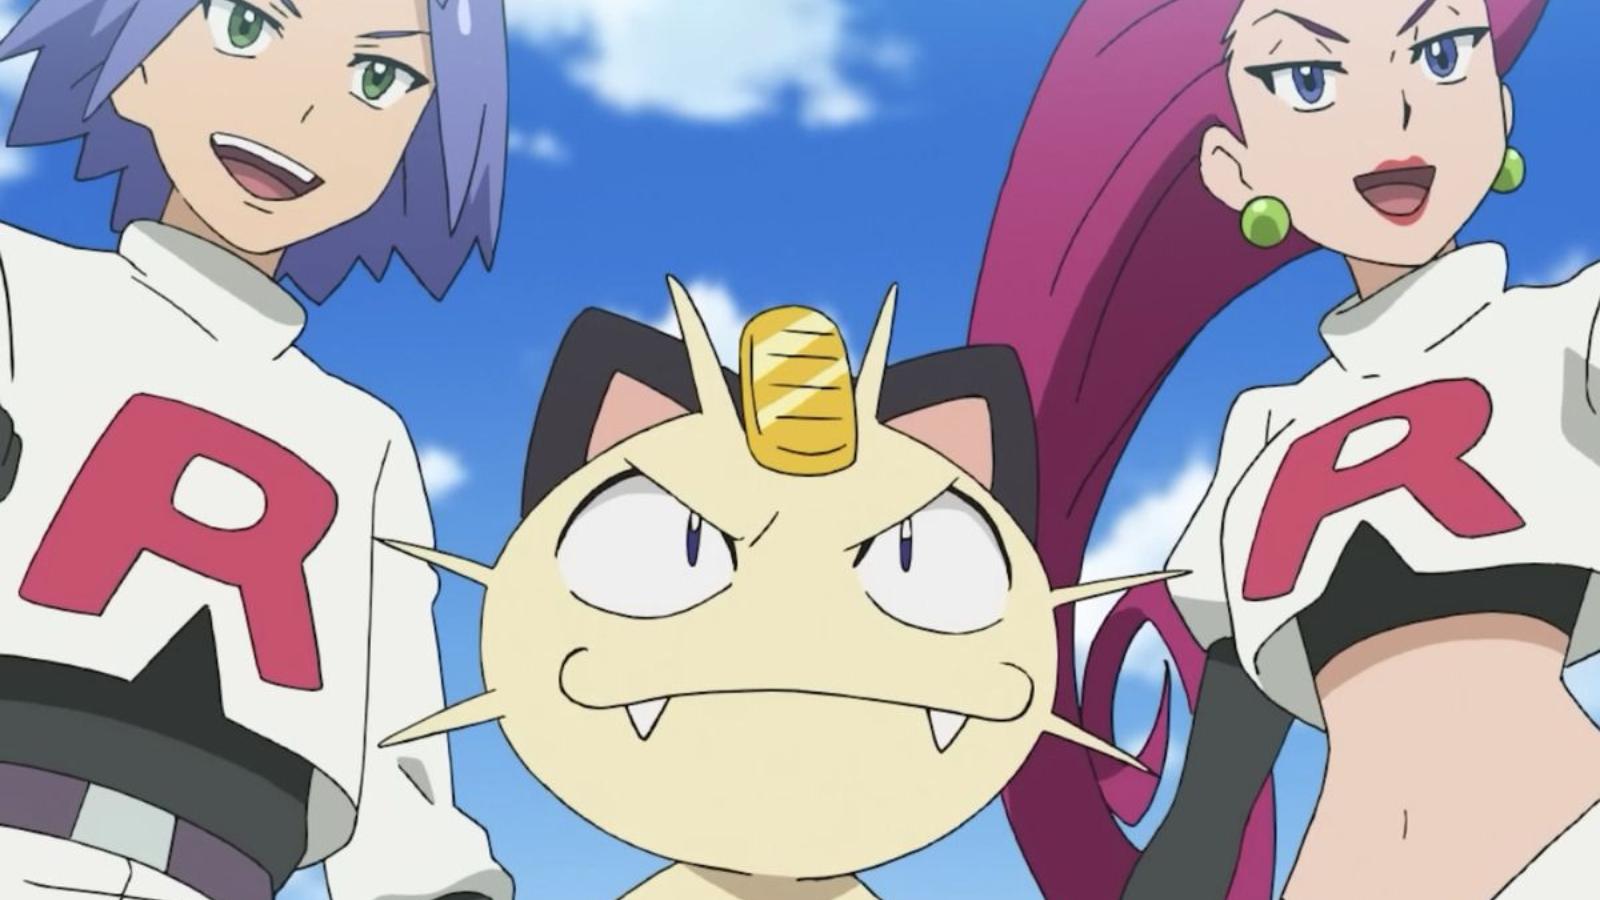 Pokemon Team Rocket being angry.